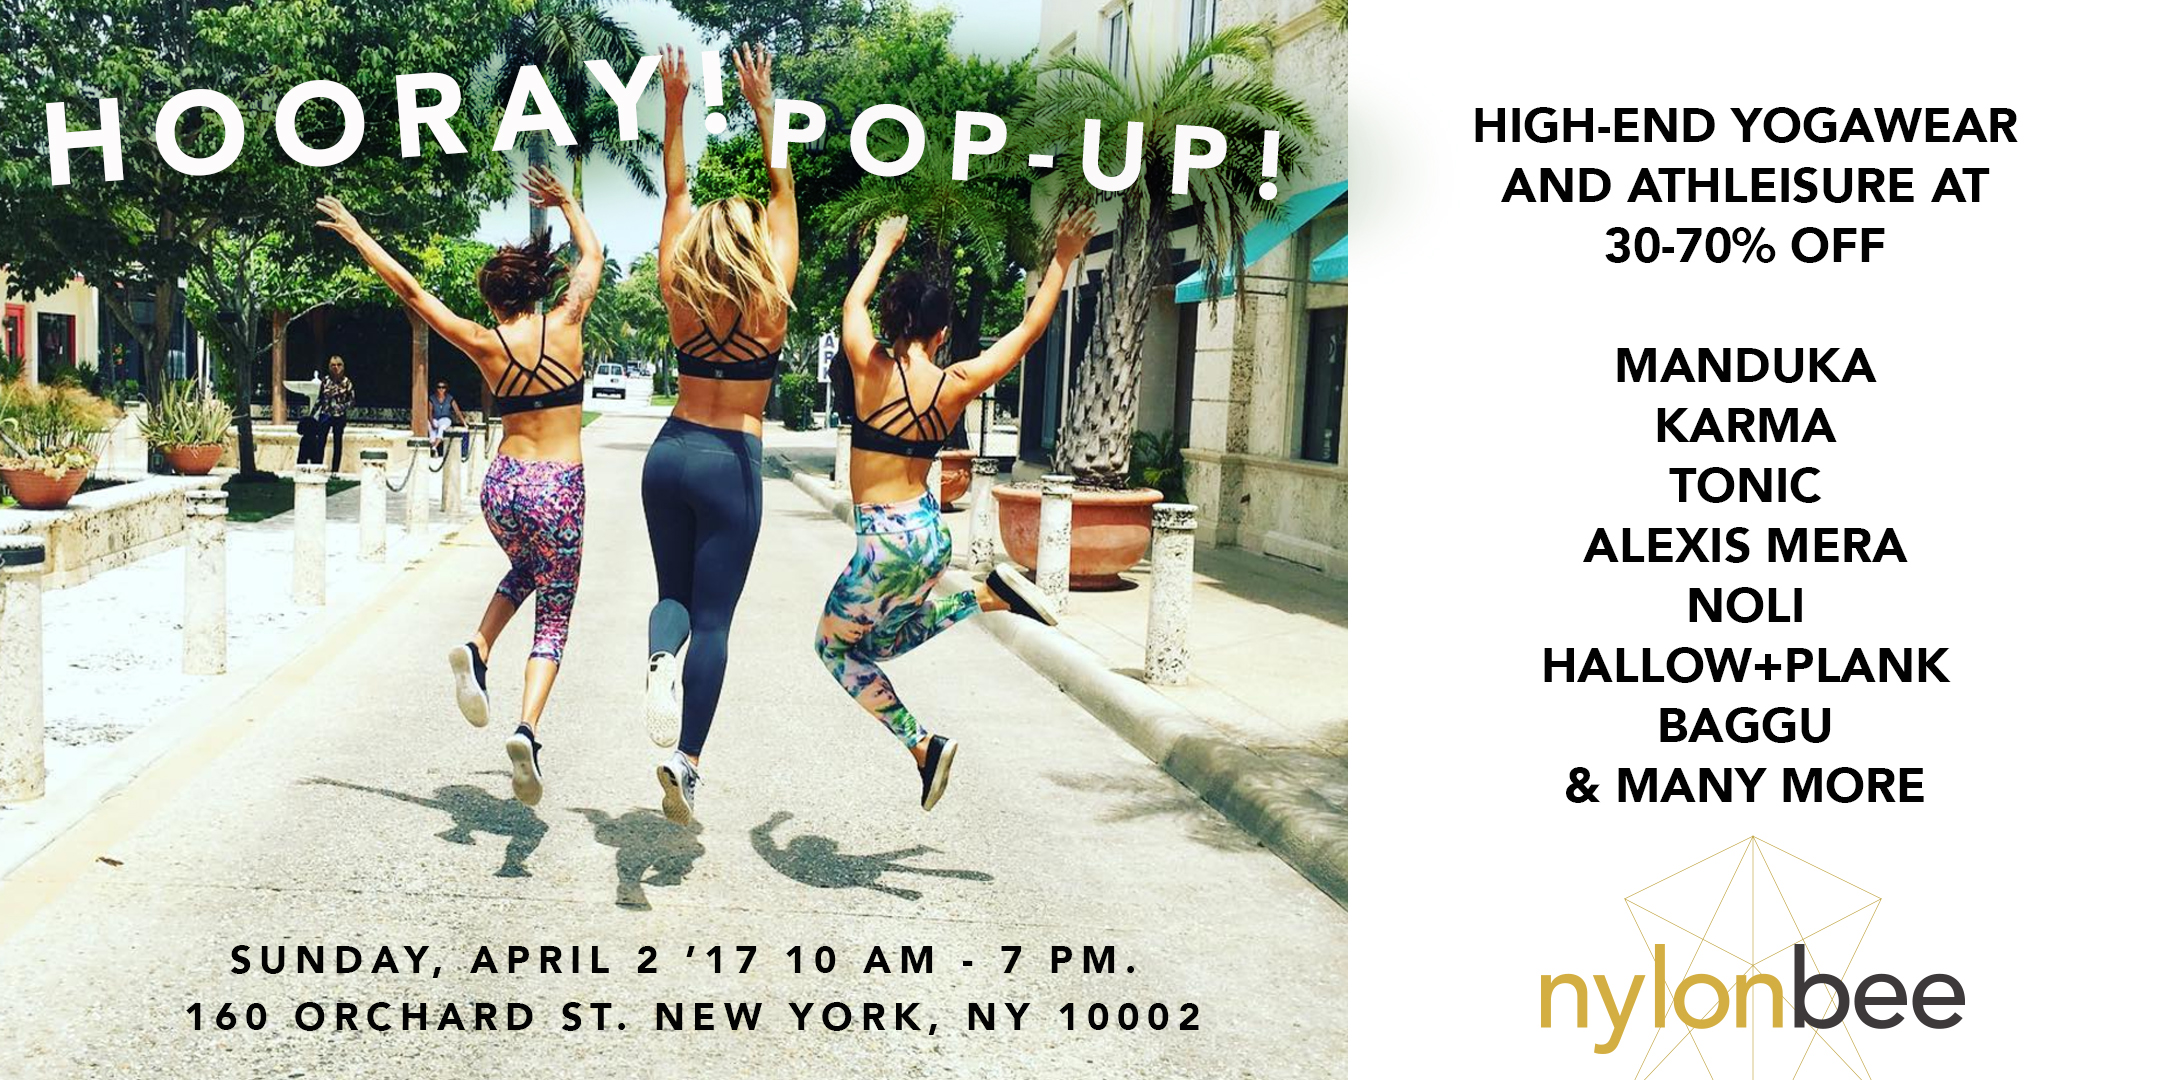 Athleisure and Yoga wear Pop-Up Sale in LES, NYC by nylonbee